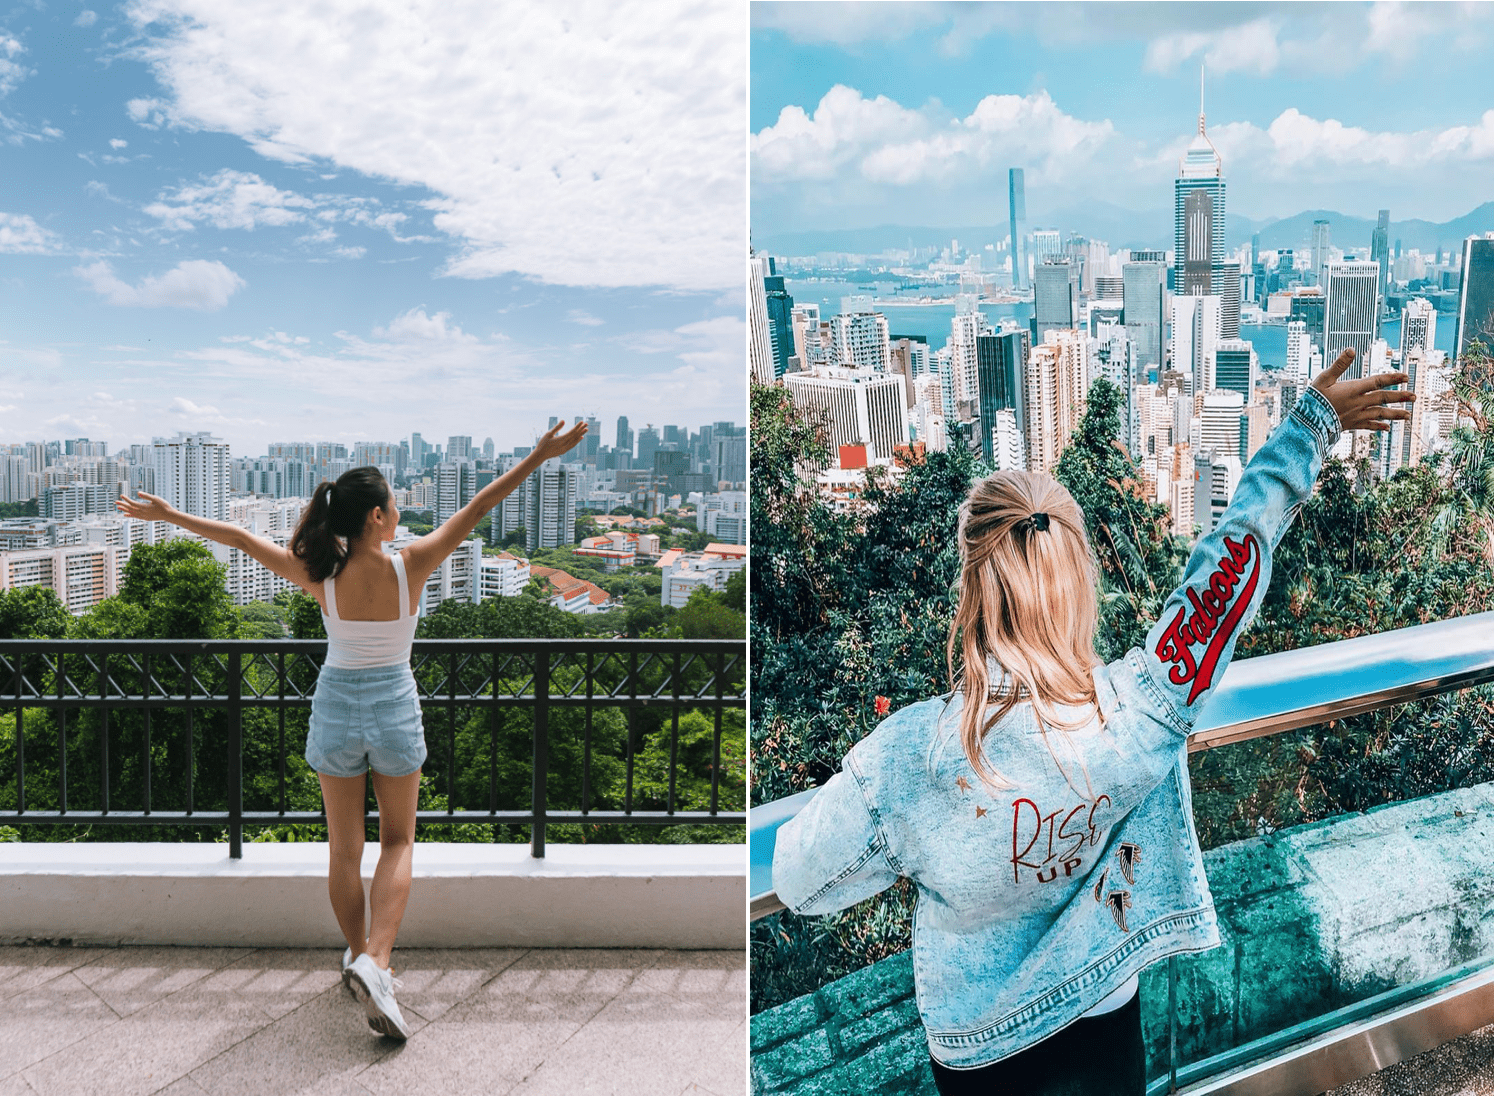 Side by side comparison of Mt Faber and Victoria Peak